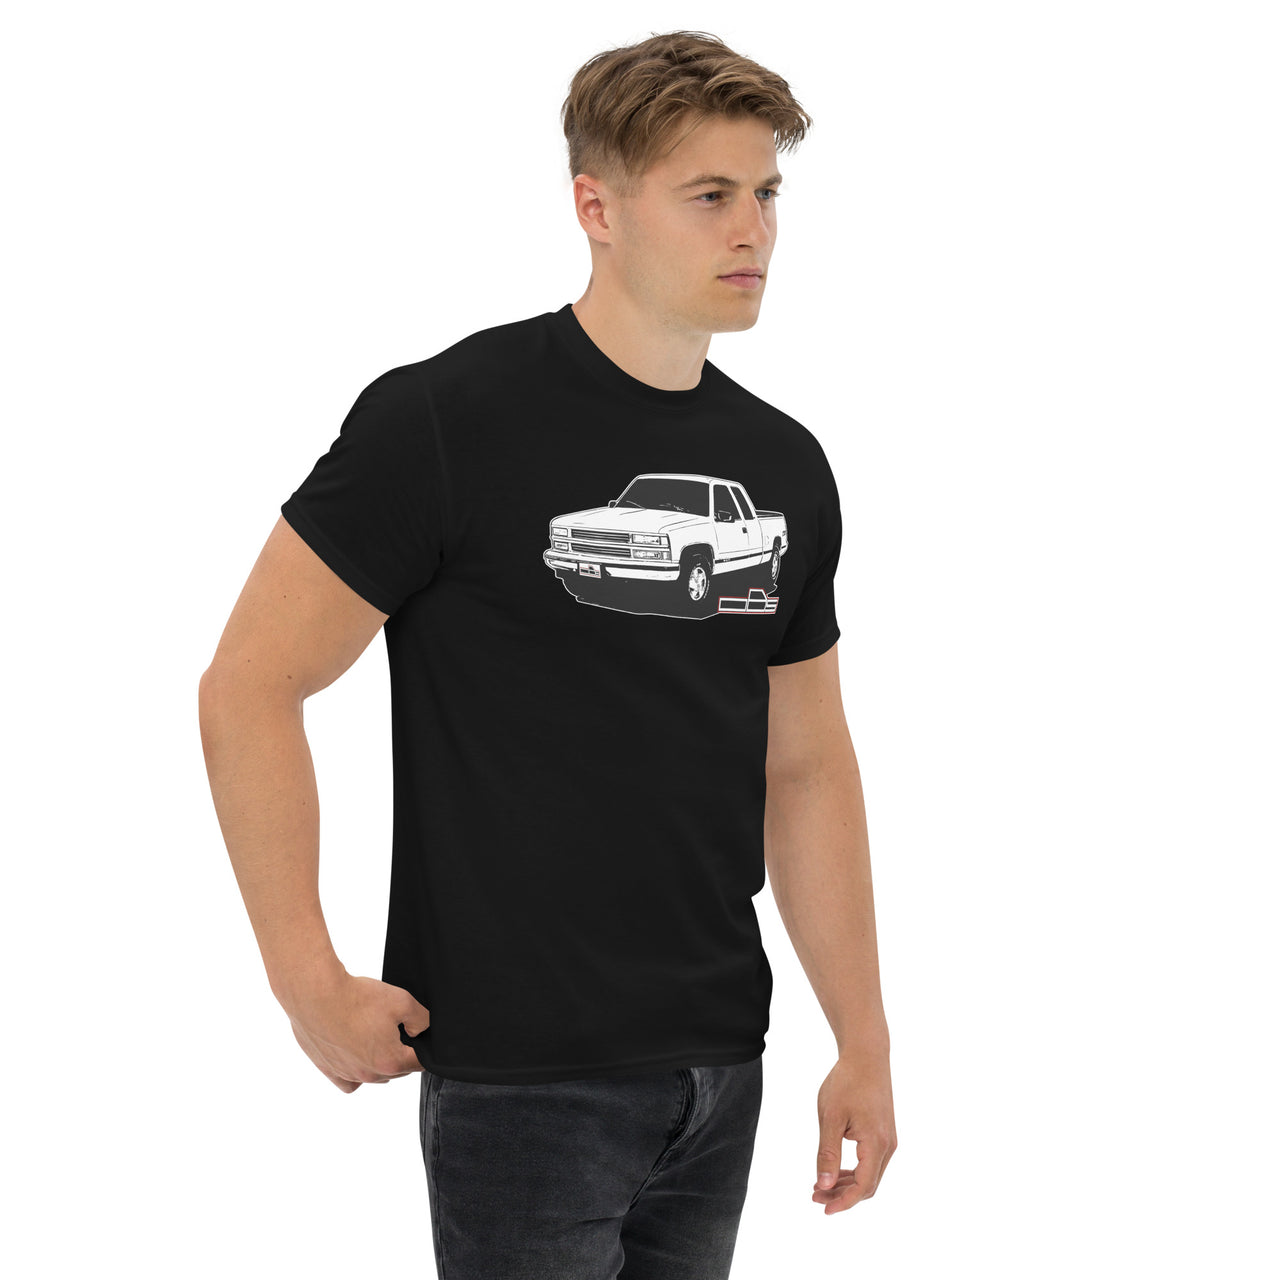 OBS Chevy 1500 Z71 T-Shirt